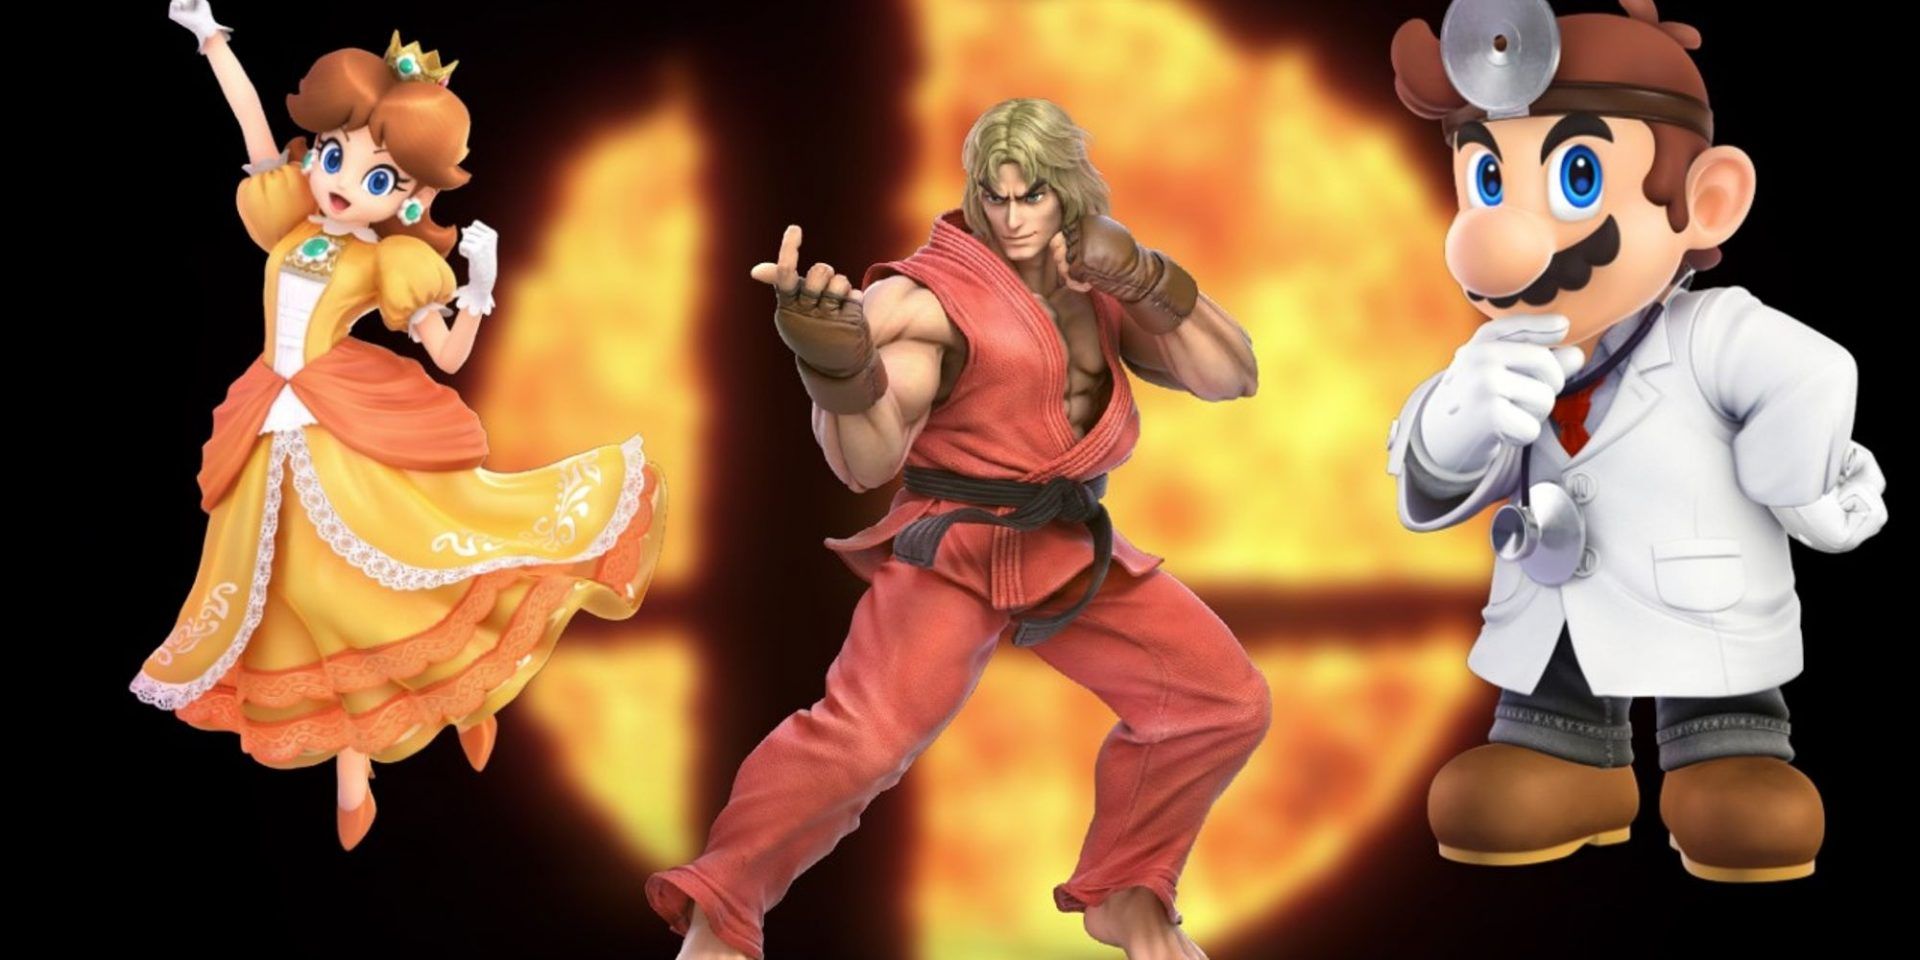 The character renders for Daisy, Ken, and Dr, Mario in front of an image of the fiert Smash logo of Super Smash Bros. Ultimate.